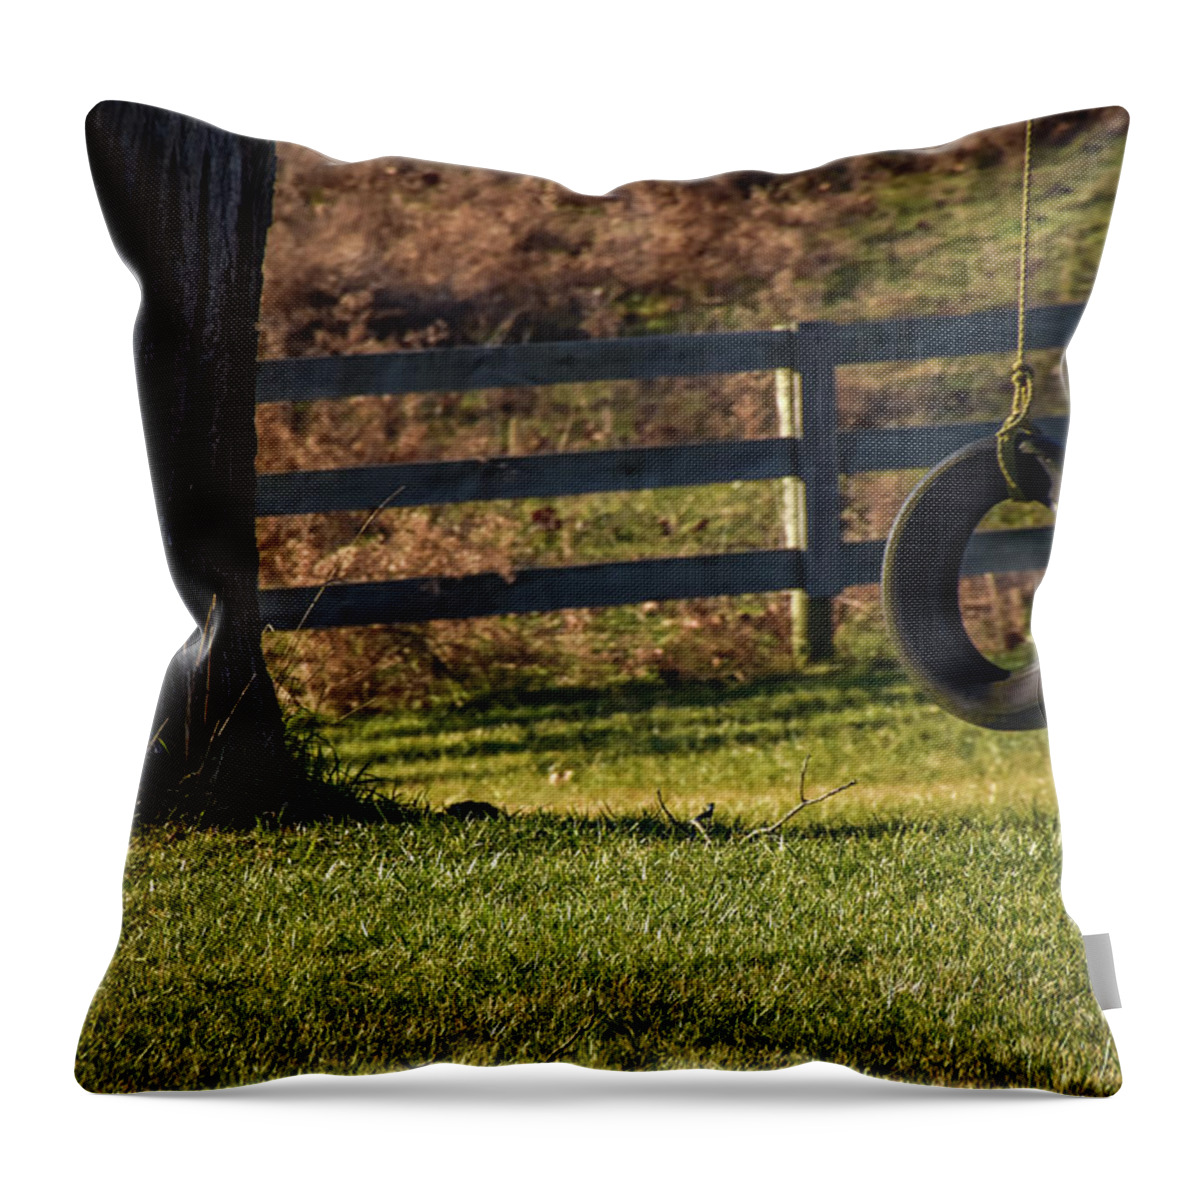 Tire Swing Throw Pillow featuring the photograph Tire Swing by Michelle Wittensoldner